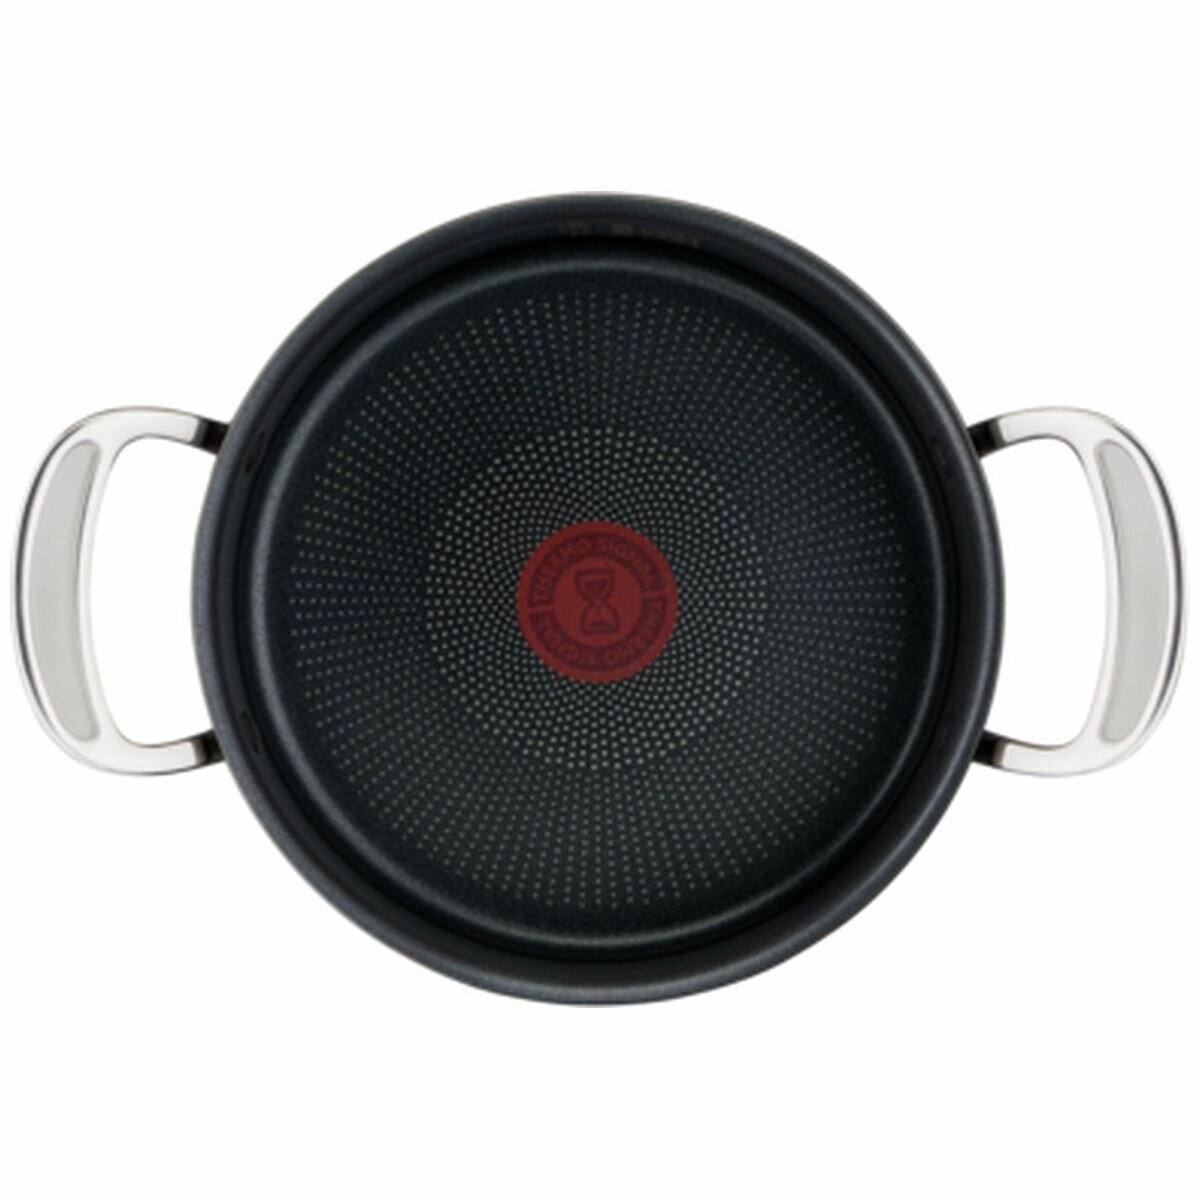 Jamie Oliver by Tefal Cooks Classic Induction Non-Stick Hard Anodised